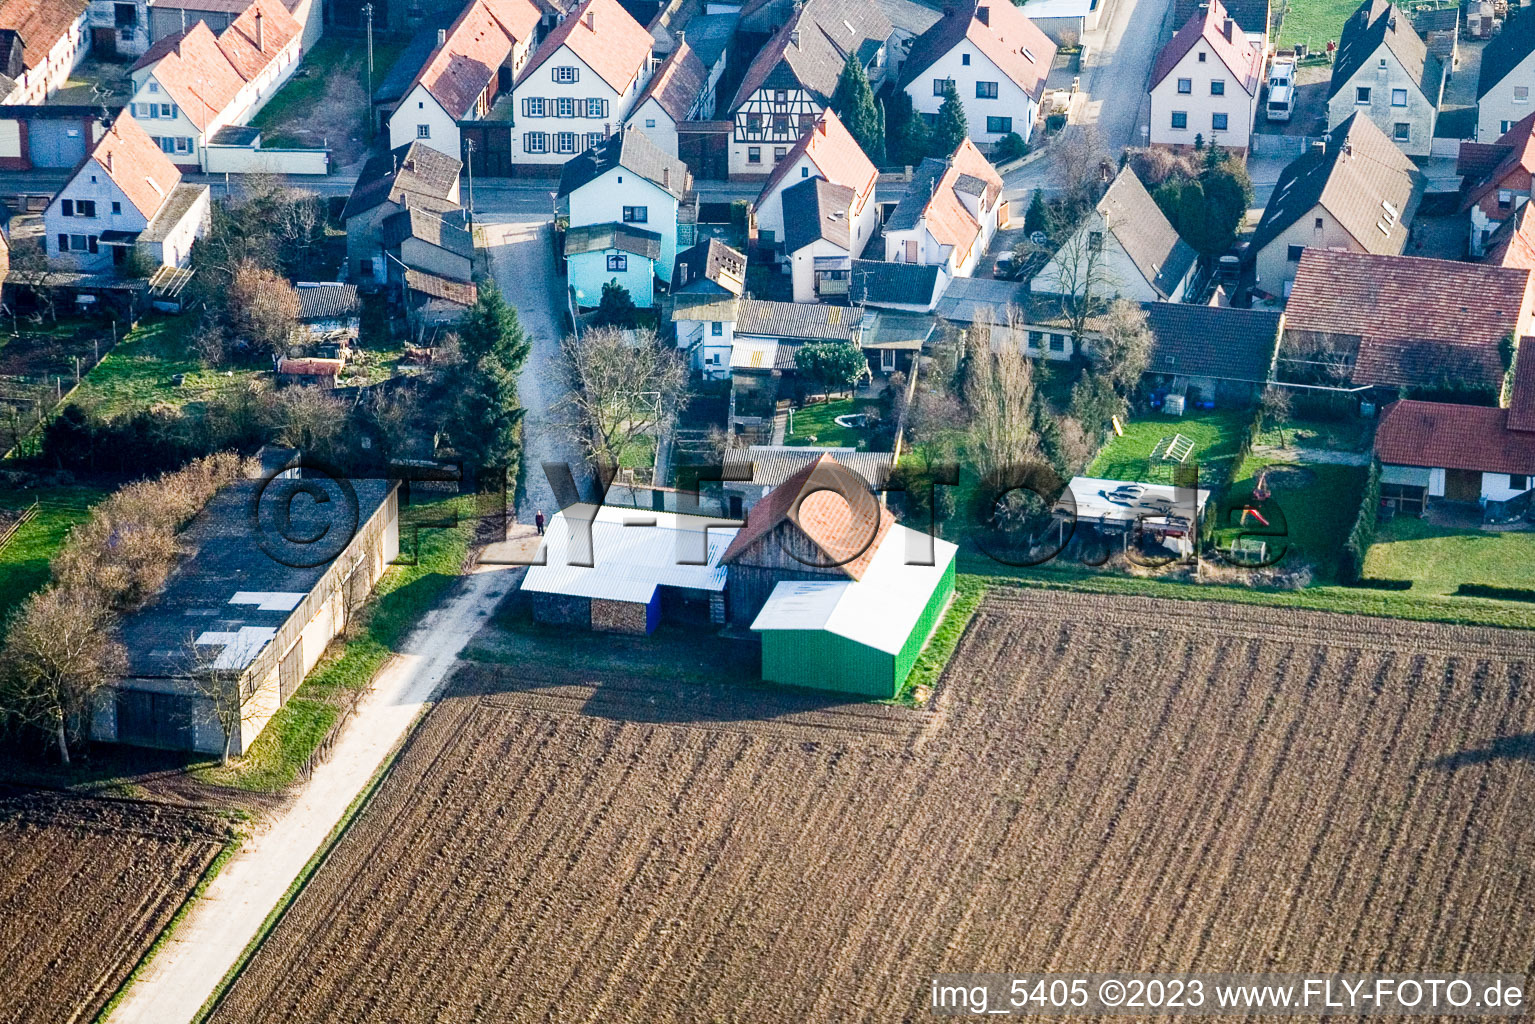 Aerial view of Saarstrasse NW in Kandel in the state Rhineland-Palatinate, Germany